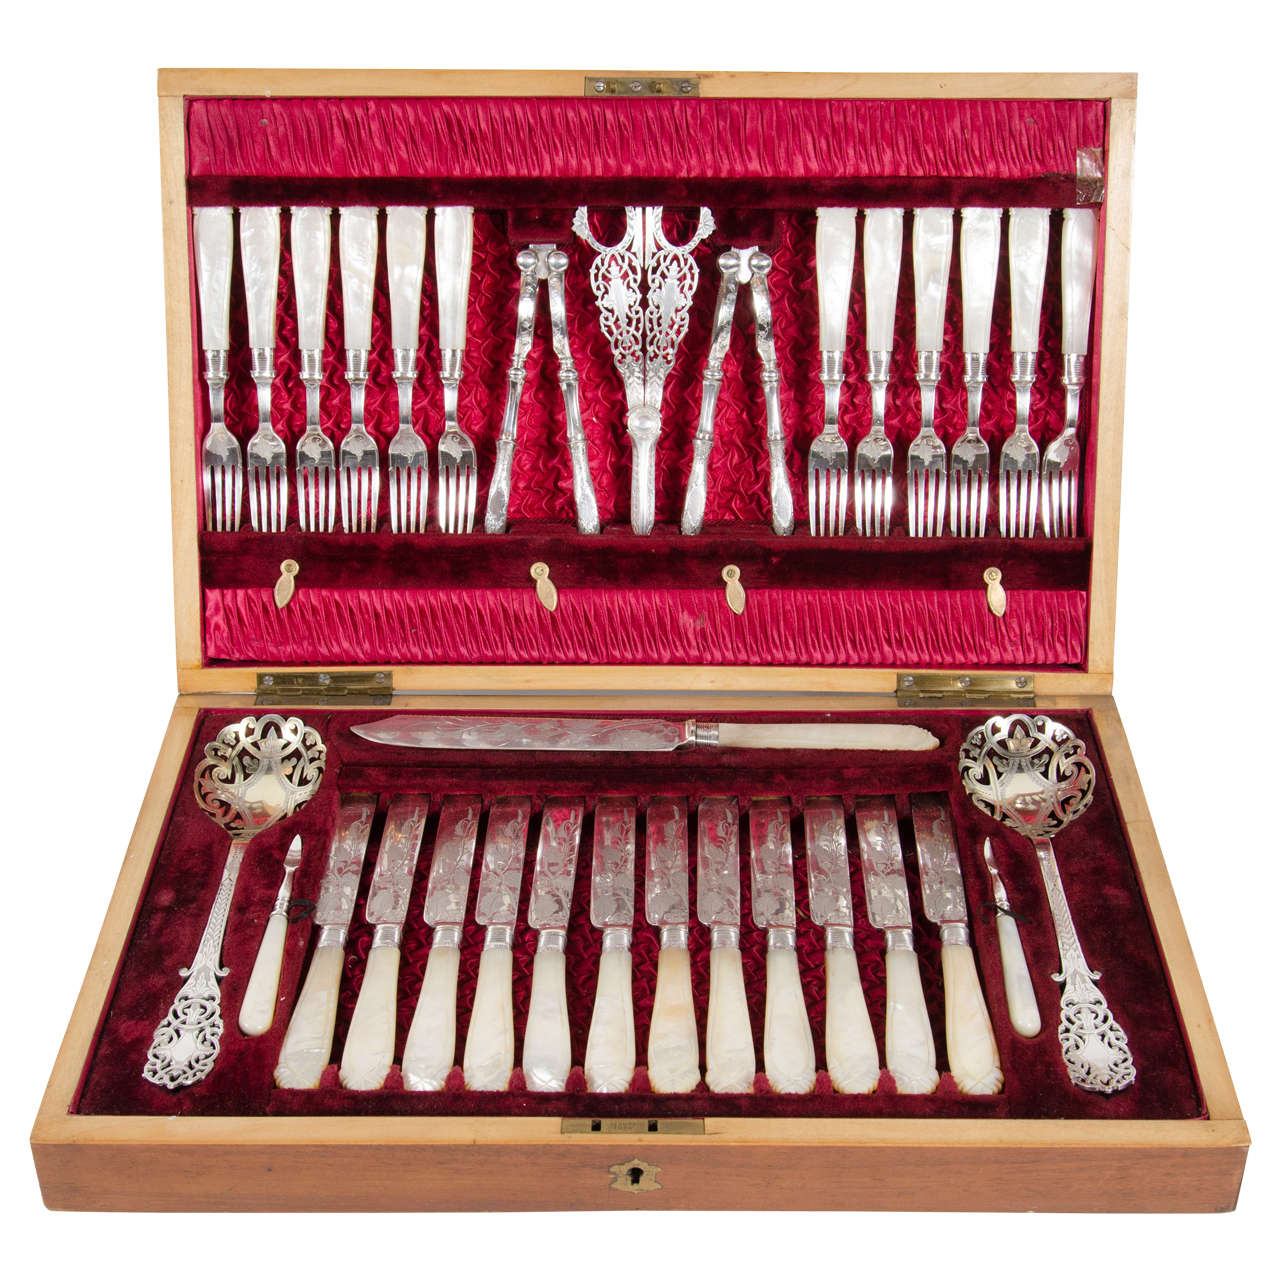 Exquisite Early Victorian Silver Plate Flatware Set for Dessert, Fruit and Nuts